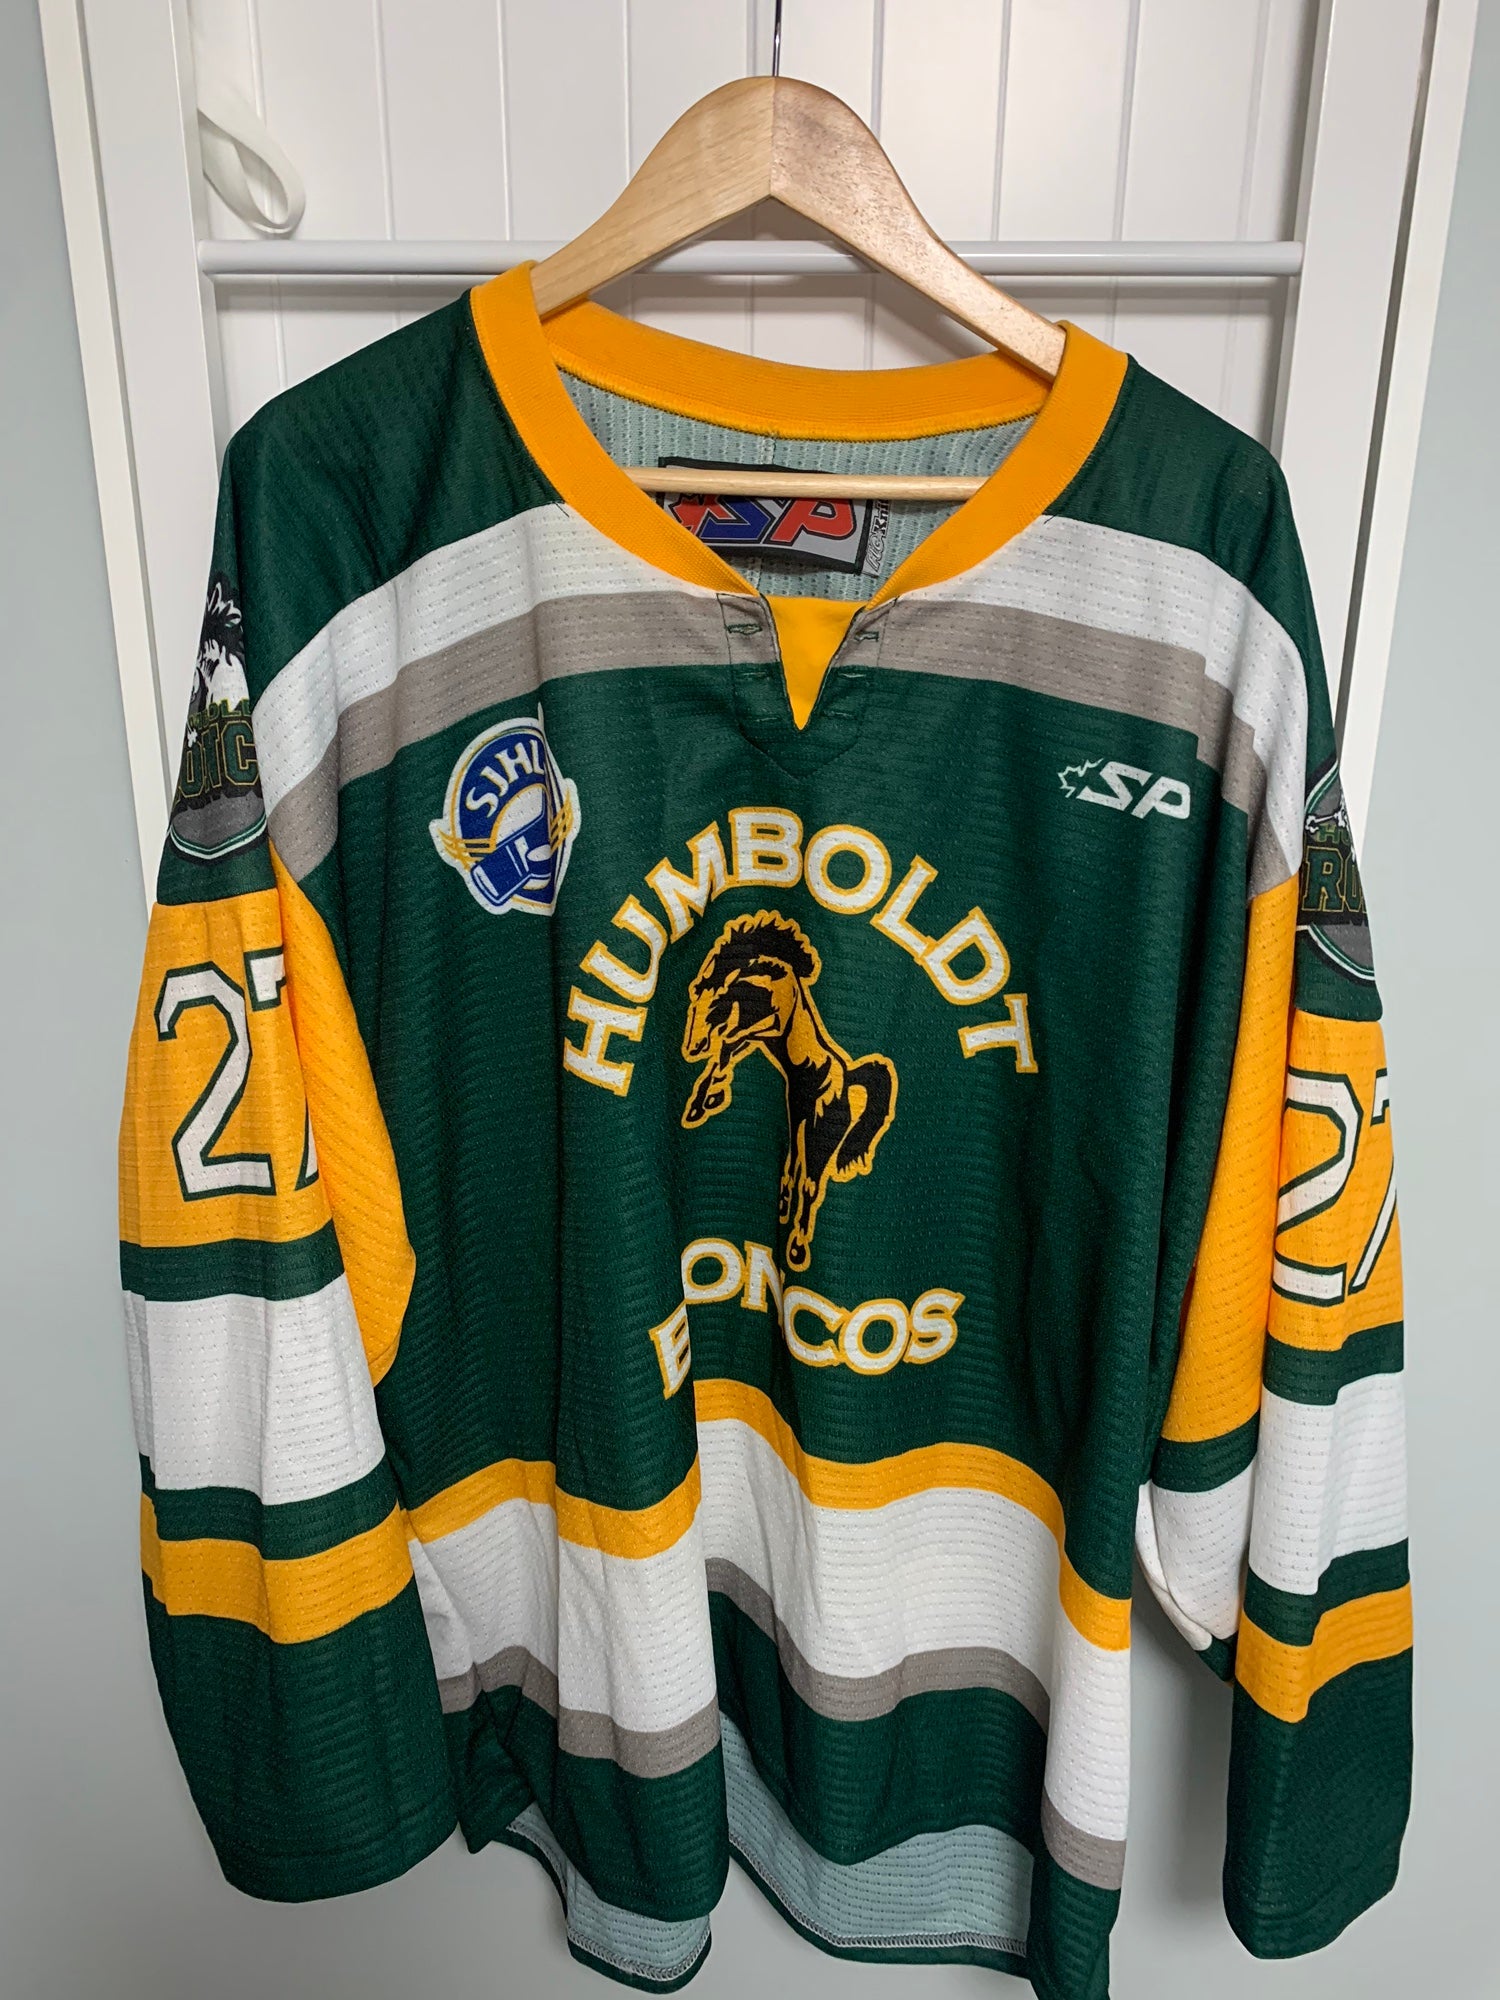 Humboldt Broncos jerseys for $60 with all proceeds going to the